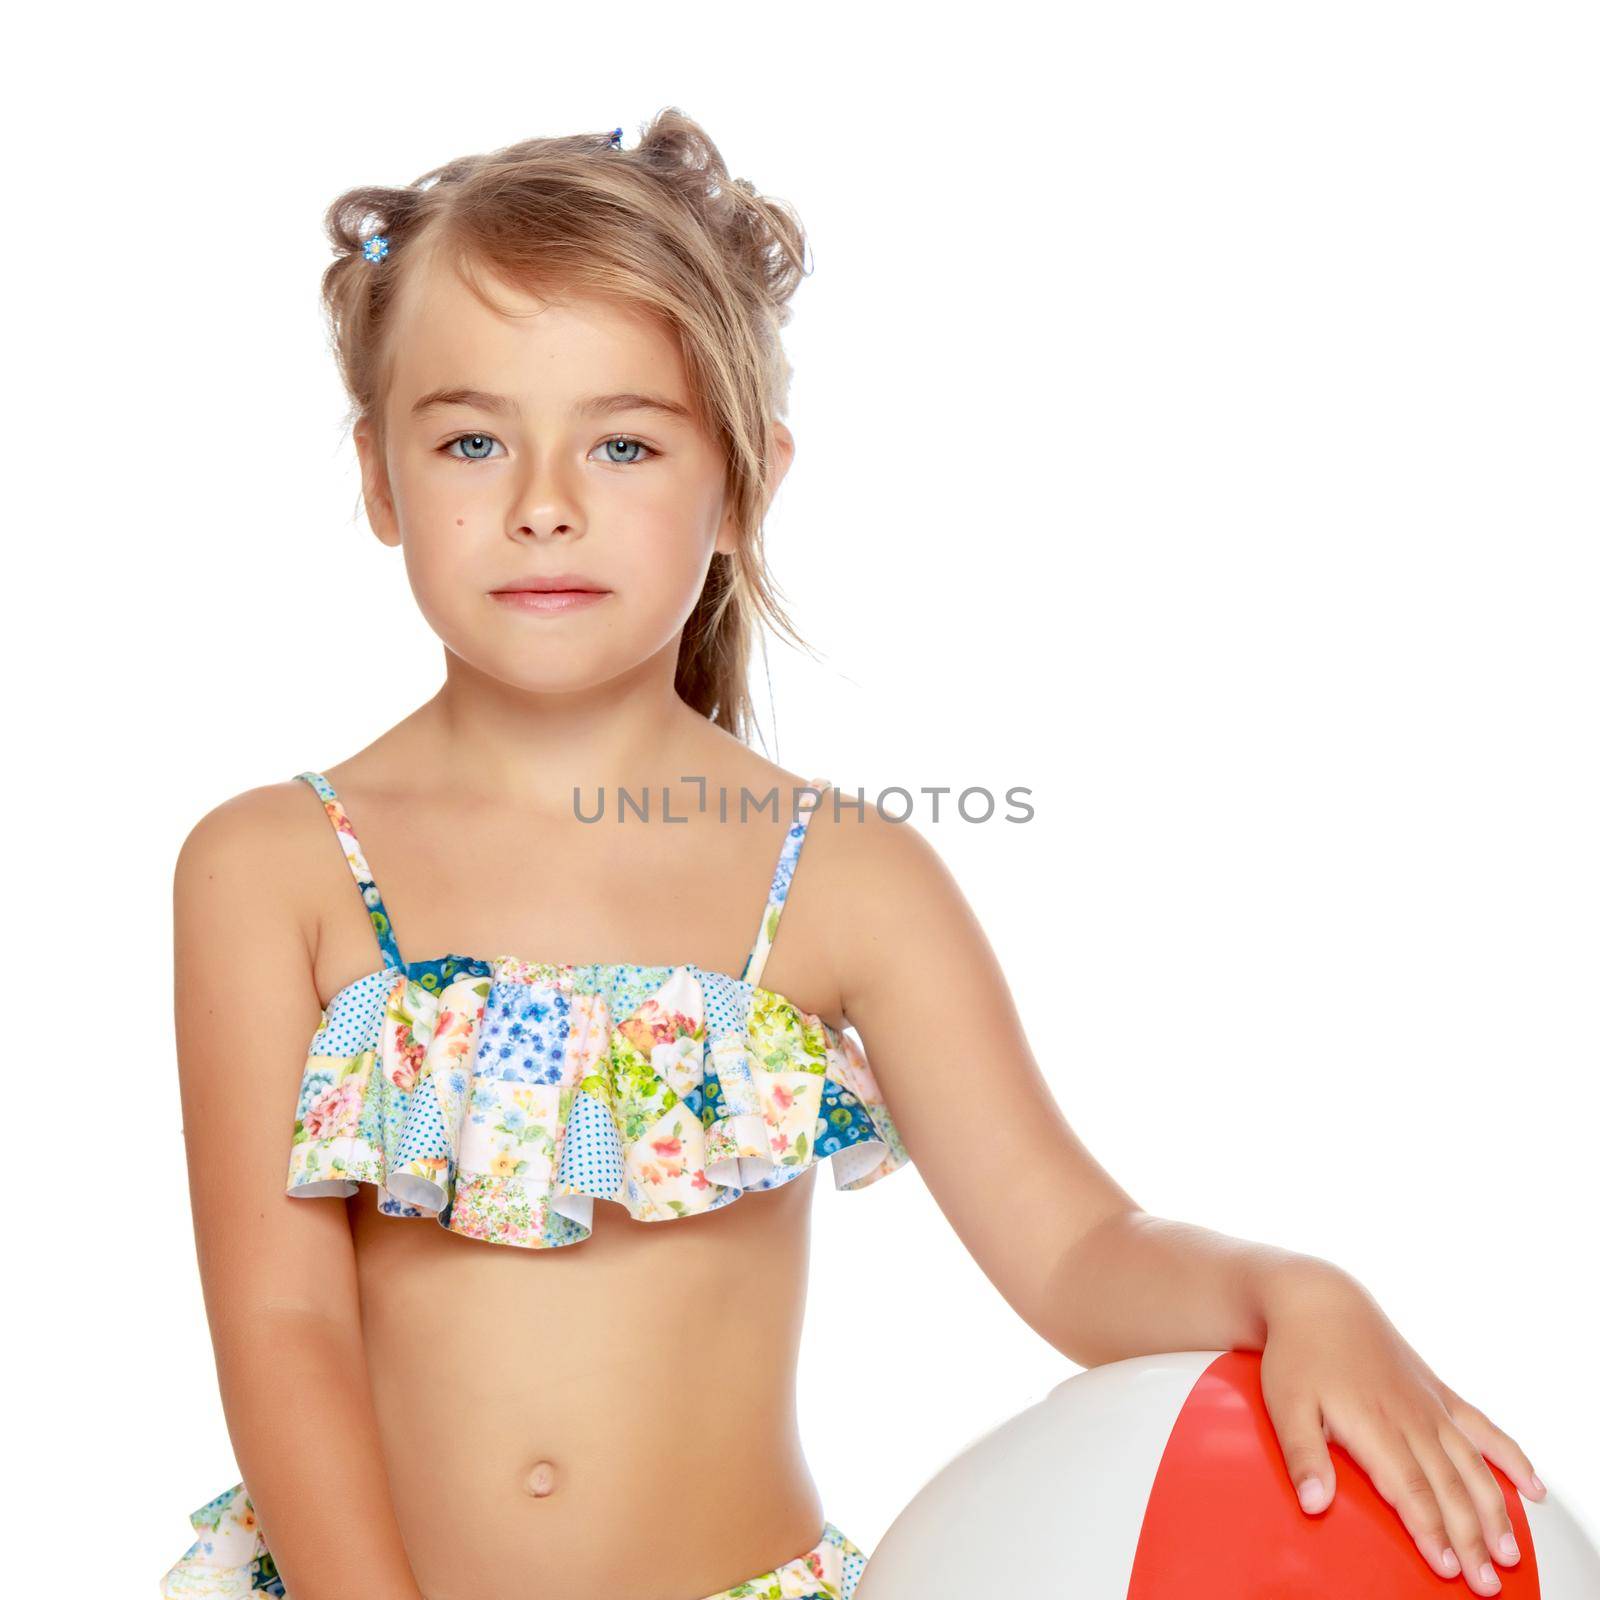 Little girl in a swimsuit with a ball by kolesnikov_studio